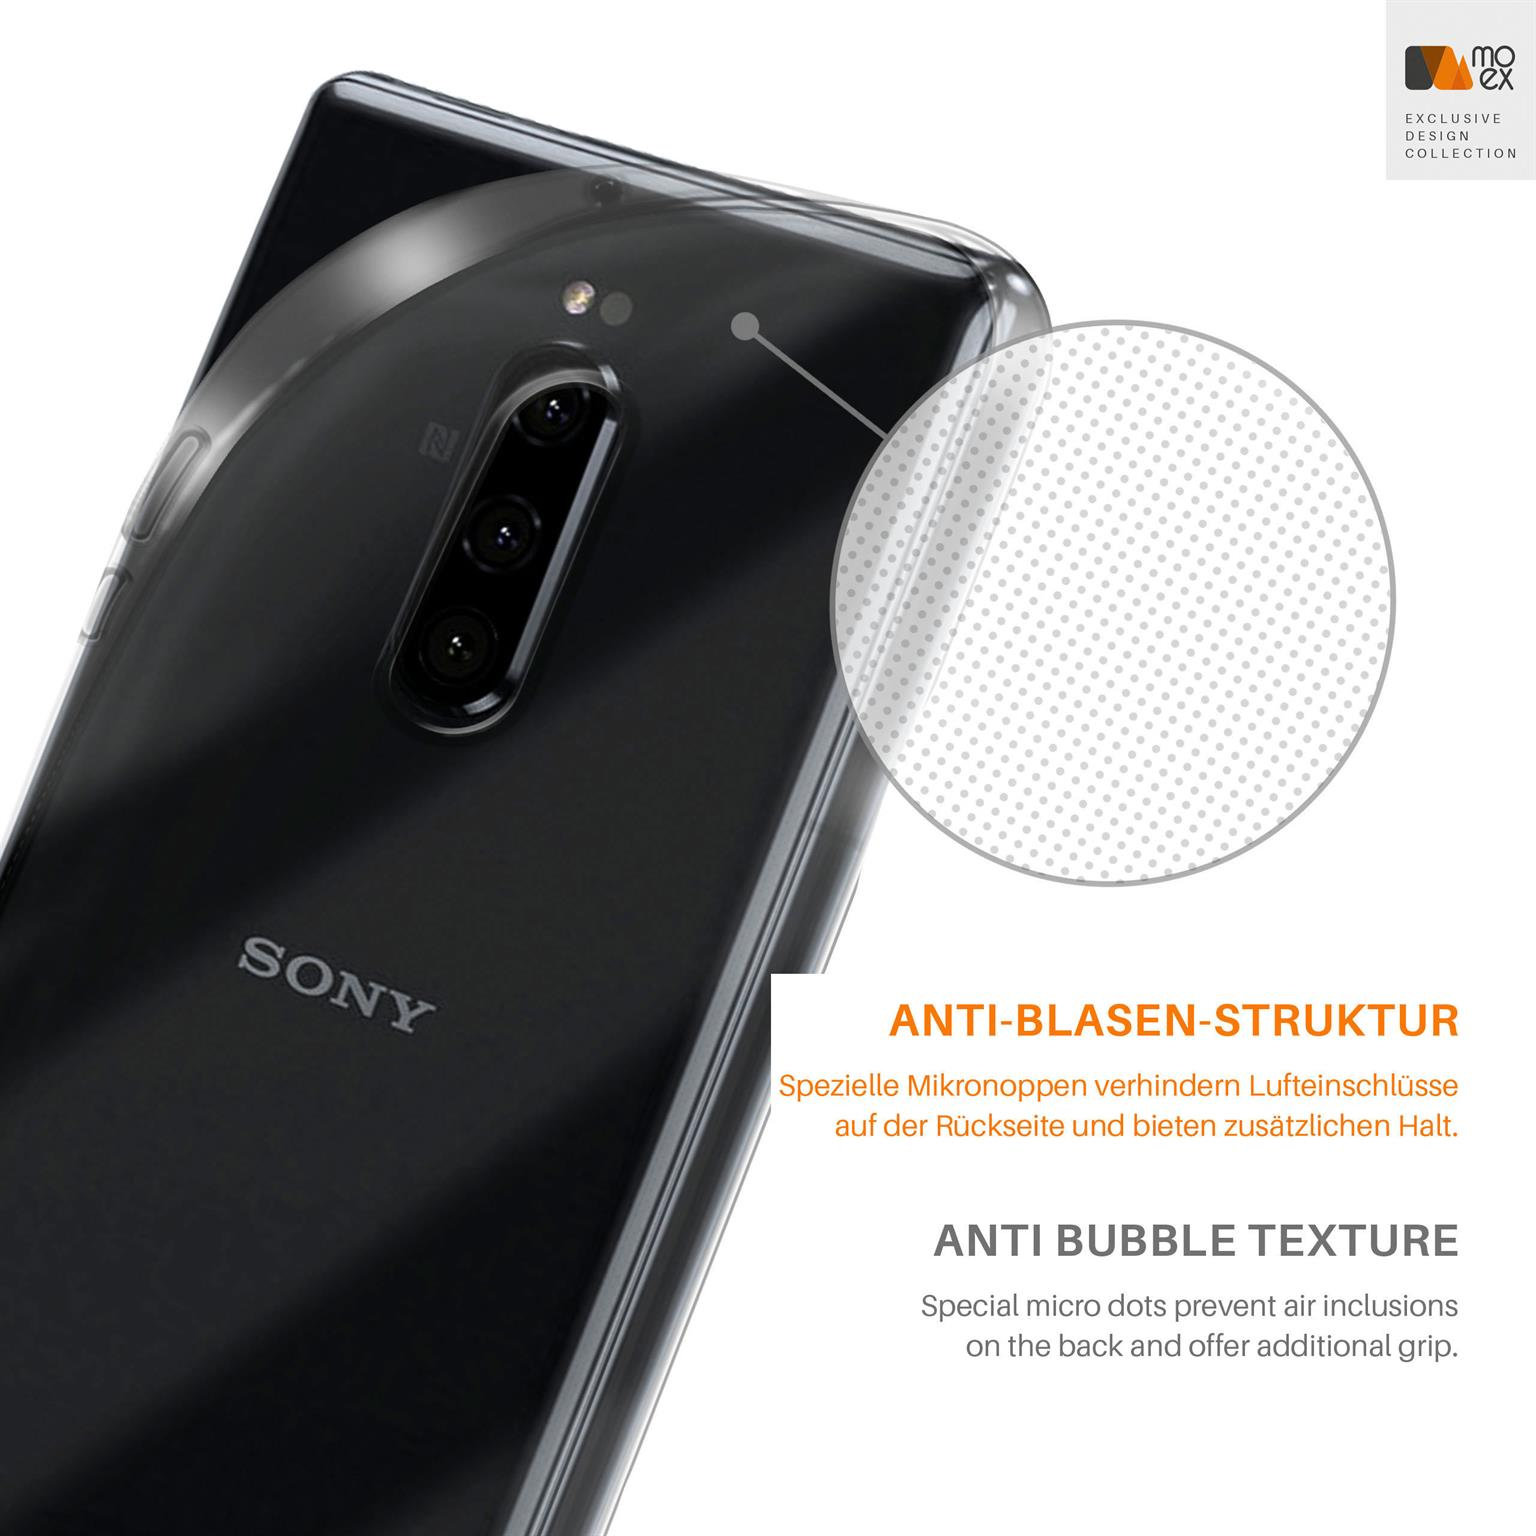 Sony, MOEX 1, Crystal-Clear Aero Xperia Backcover, Case,